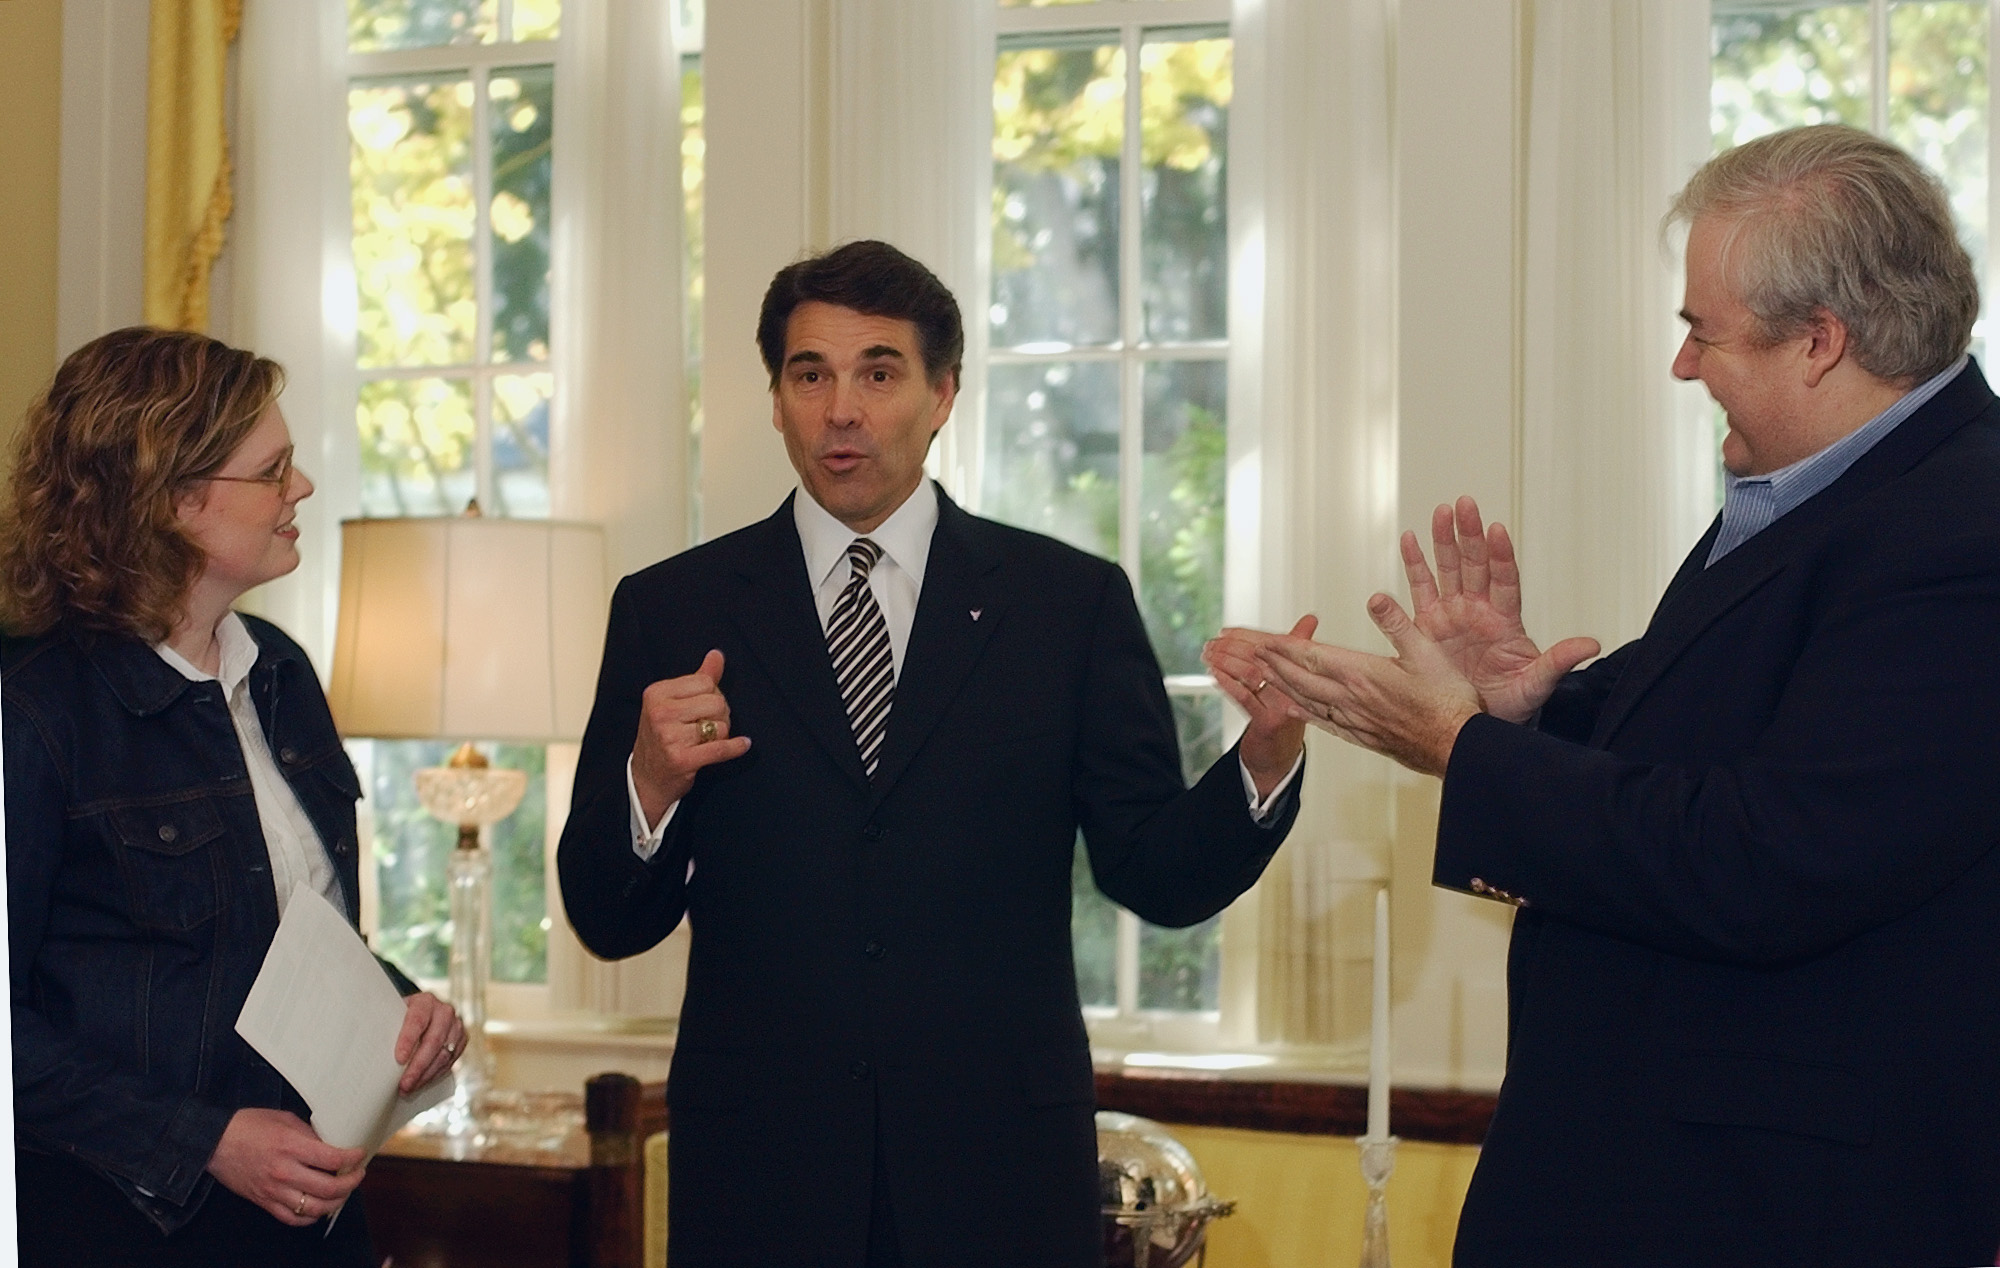 Rick Perry, in a suit, wears a surprised and excited expression as two political operatives cheer him on.